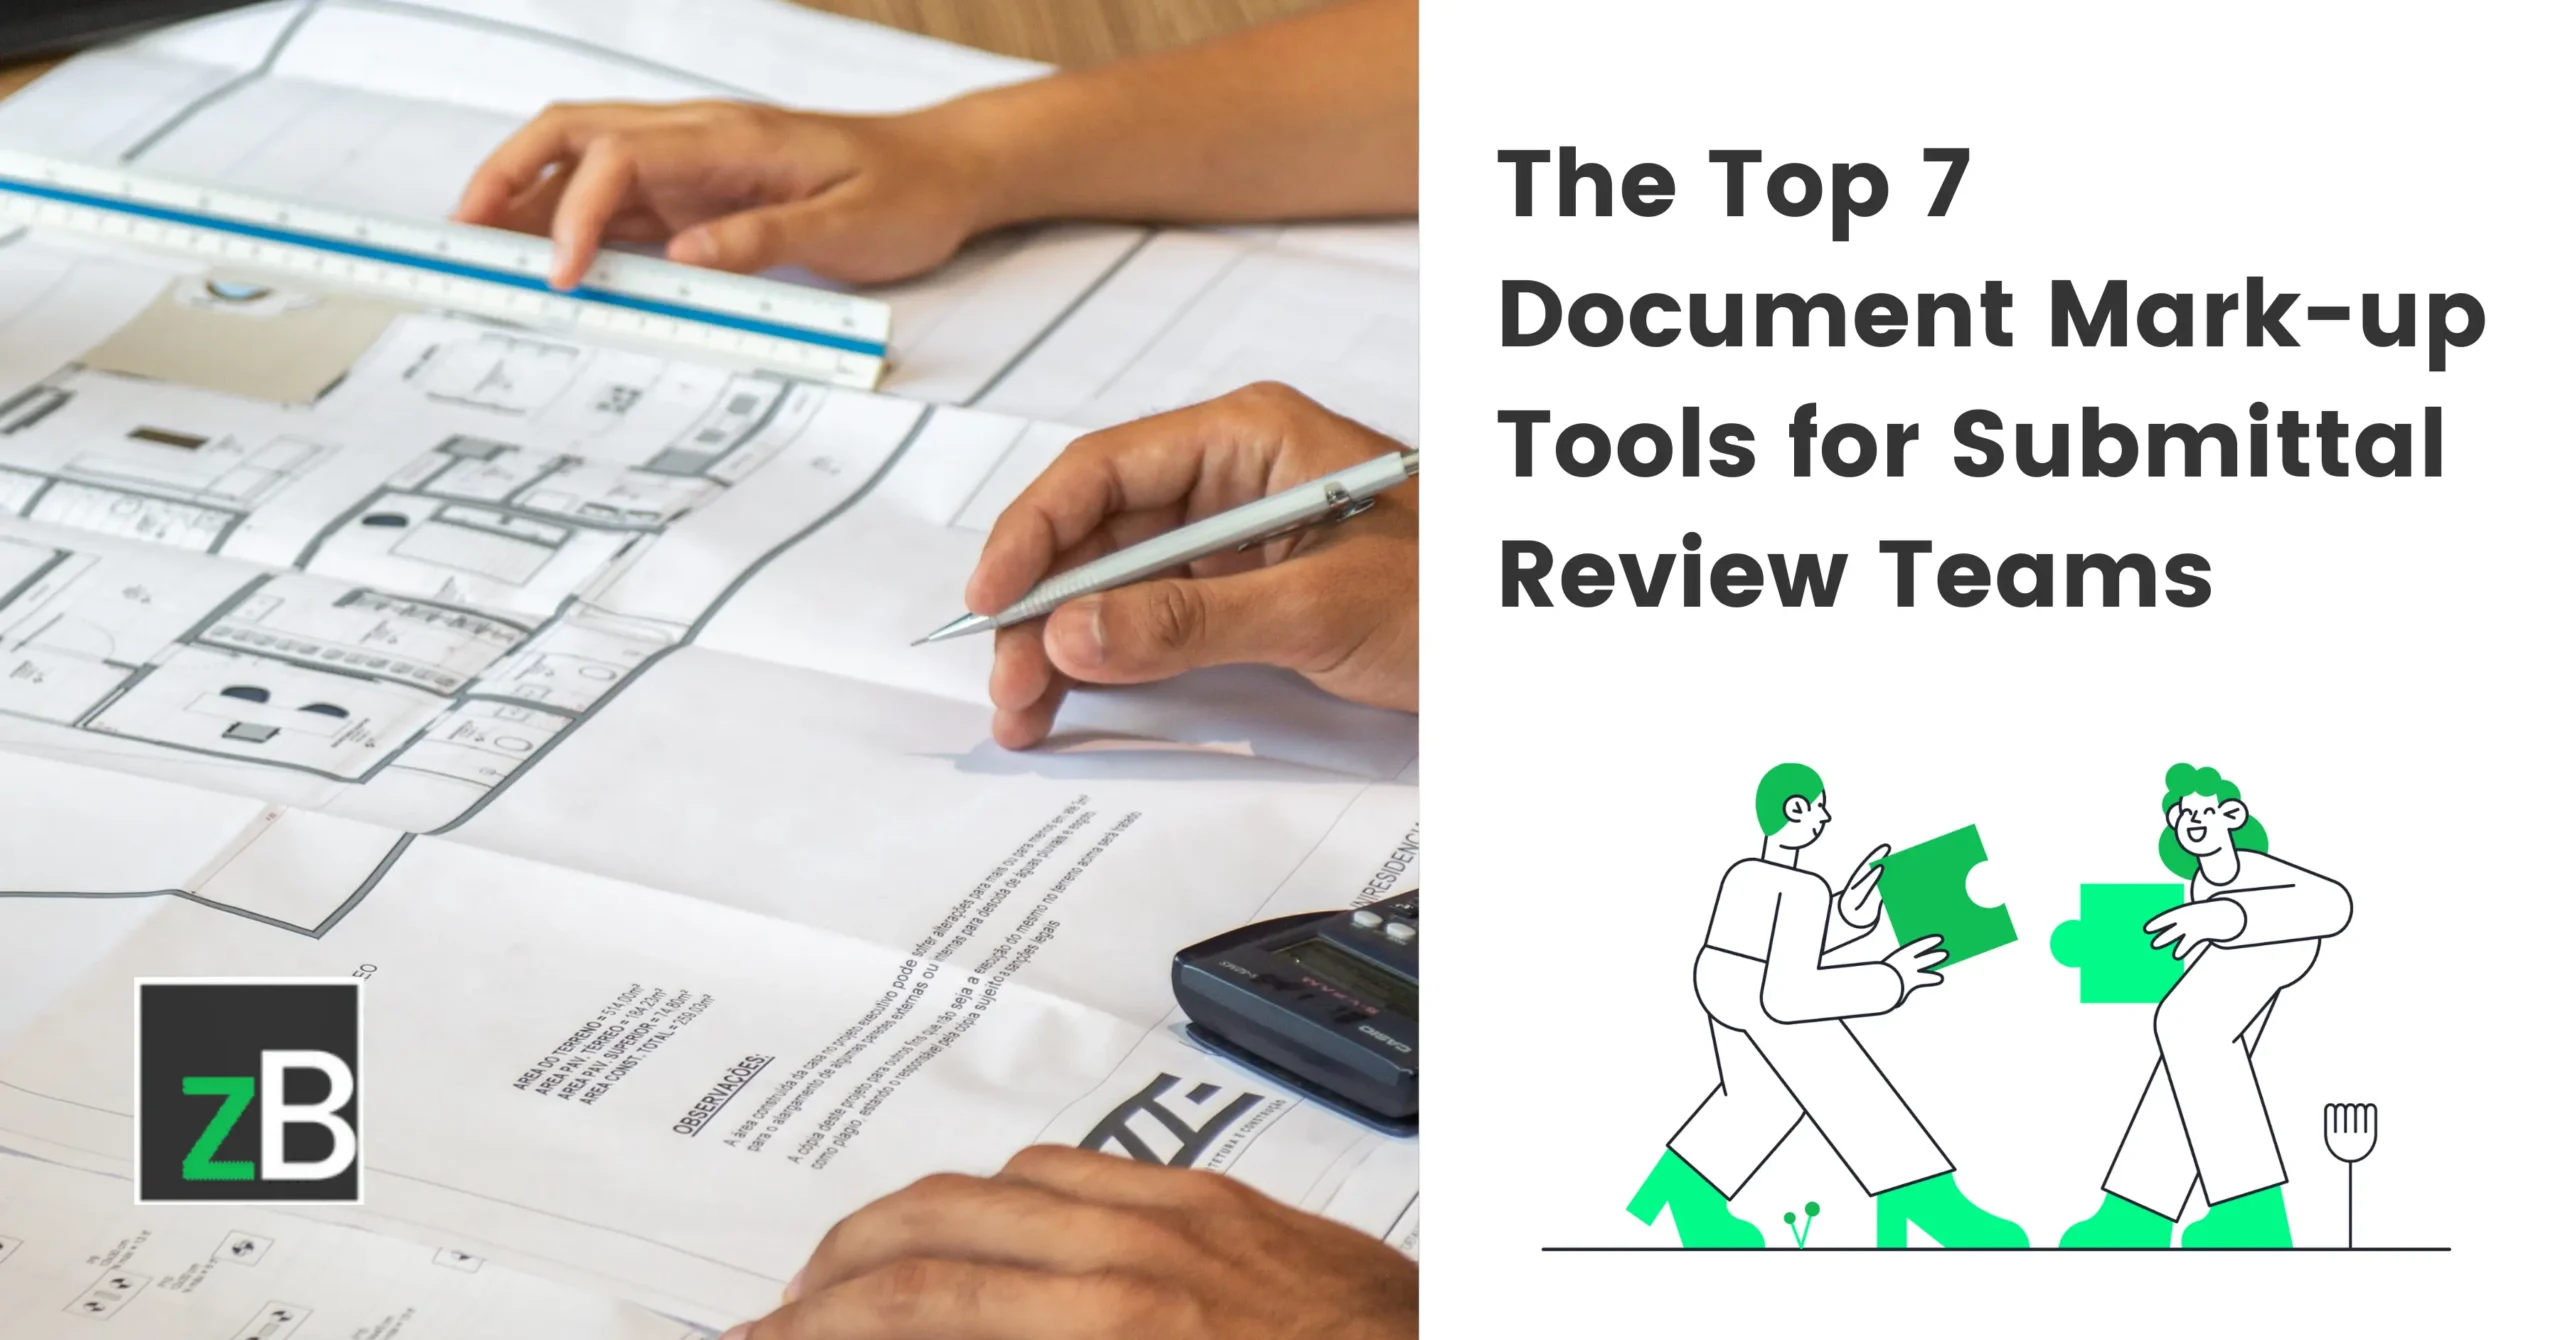 Top 7 Document Mark-up Tools for Submittal Review Teams